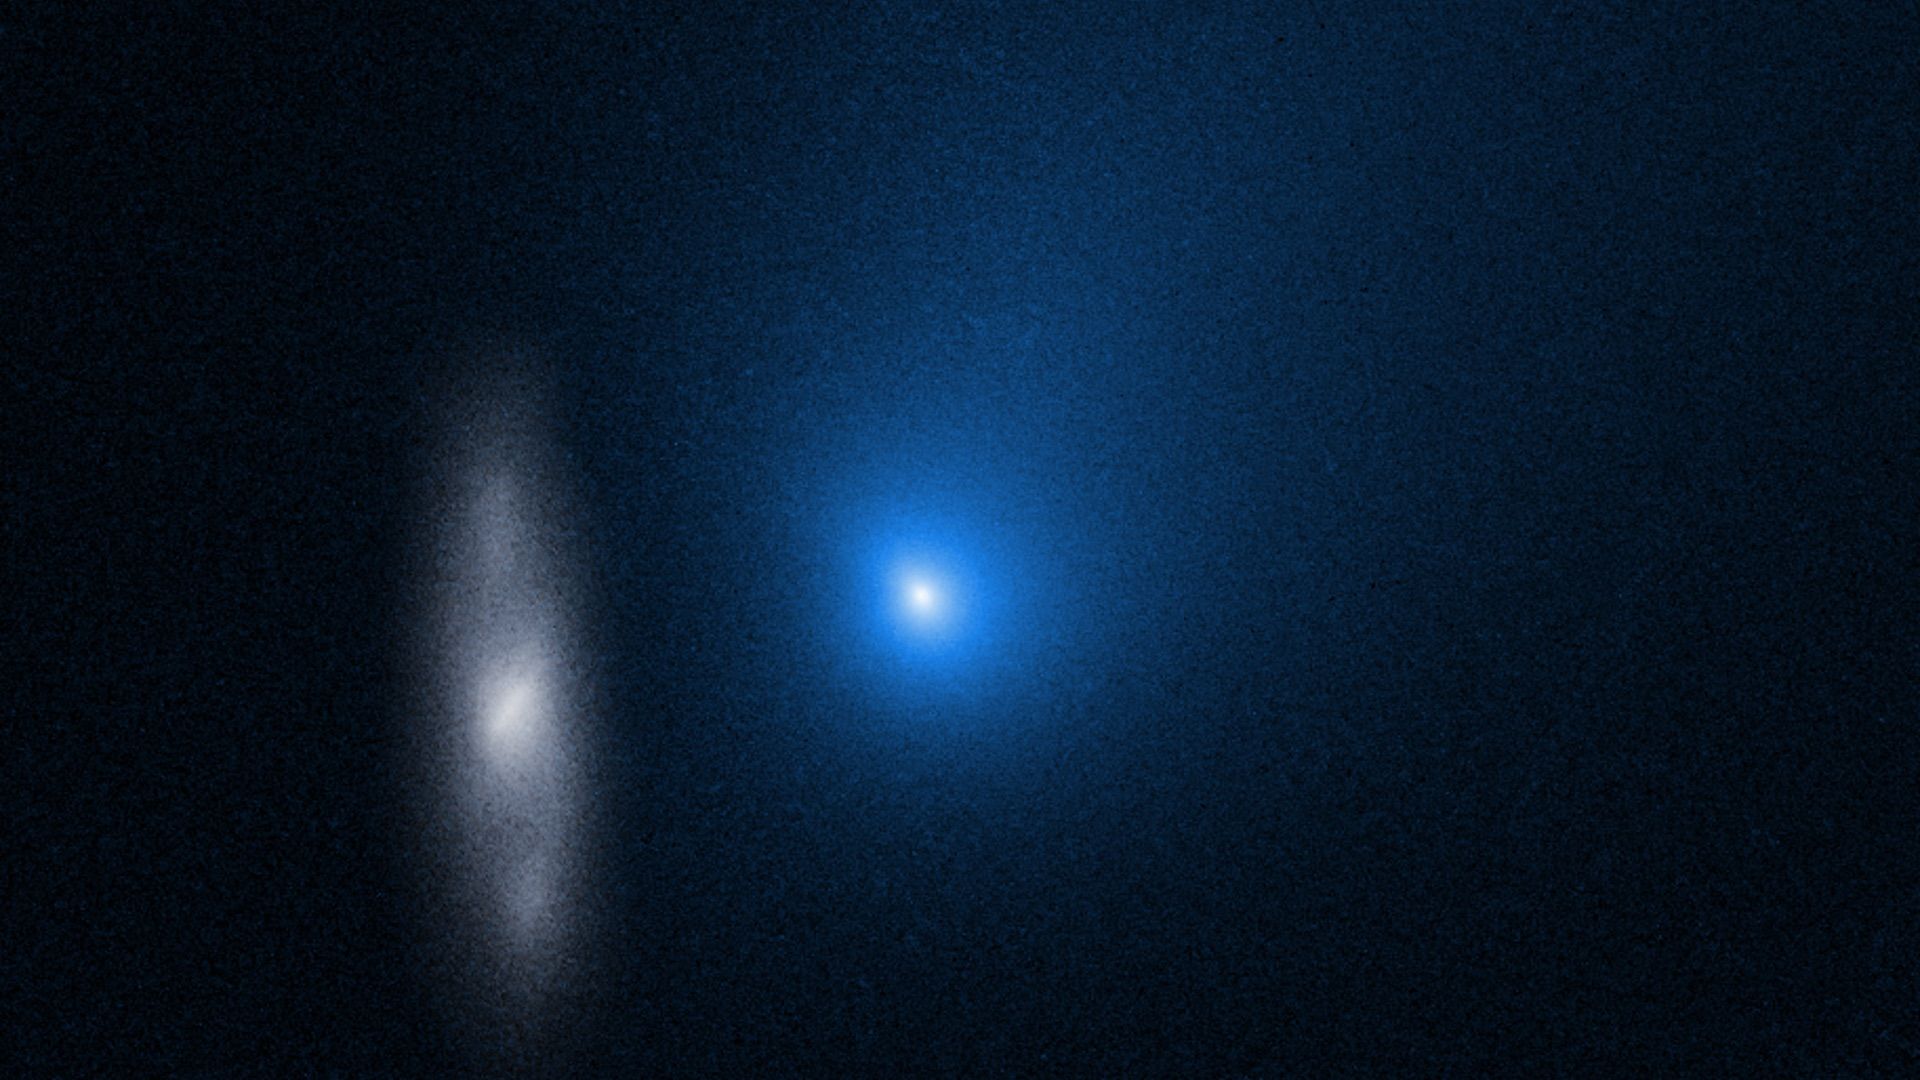 A comet in blue and a stretched out distorted galaxy seen in the foreground